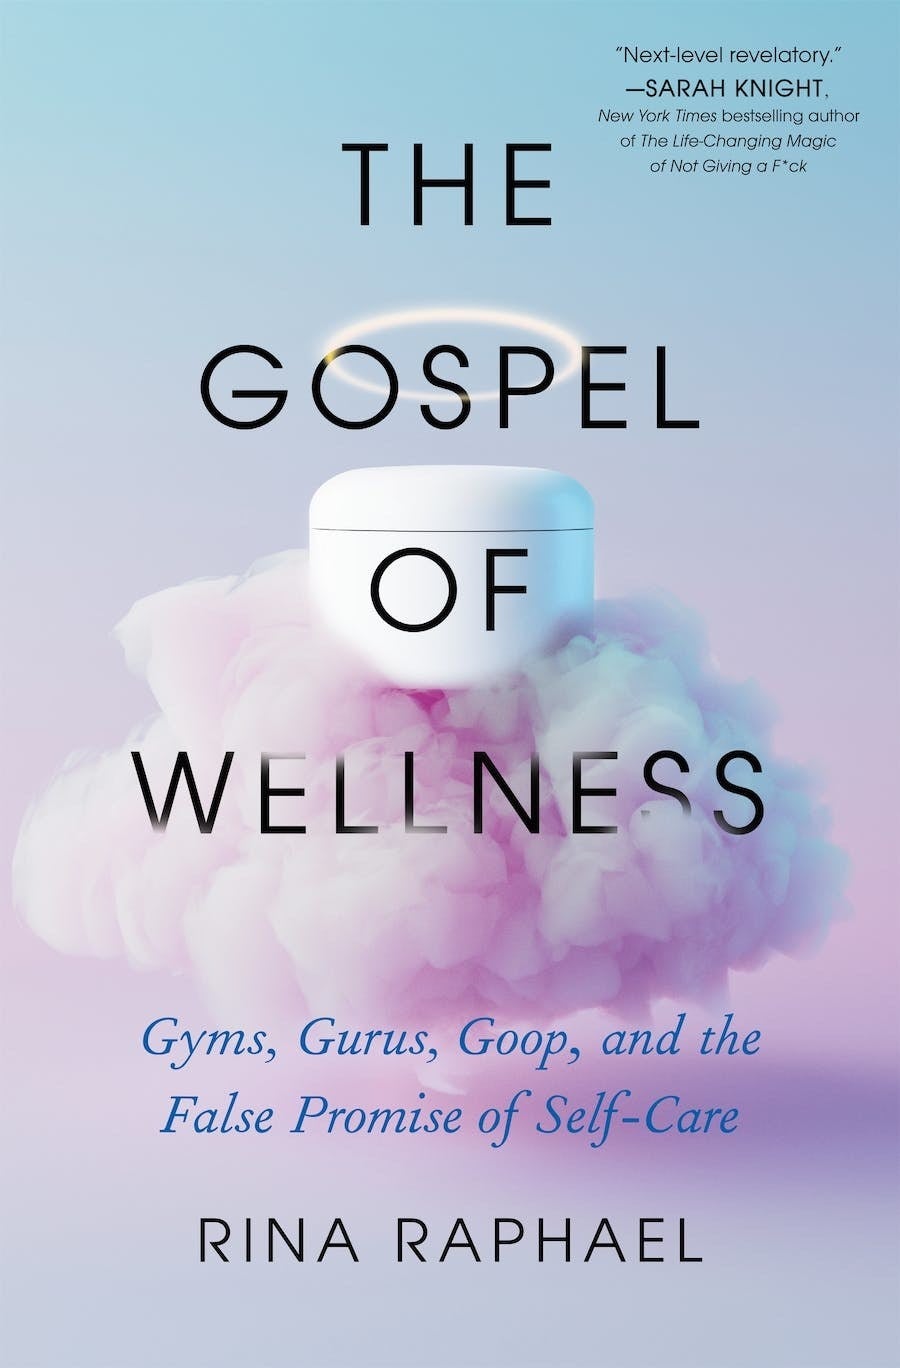 cover for &quot;The Gospel of Wellness...&quot; which is a light, fluffy cloud with the title overlaid onto the image, written in all capital letters.